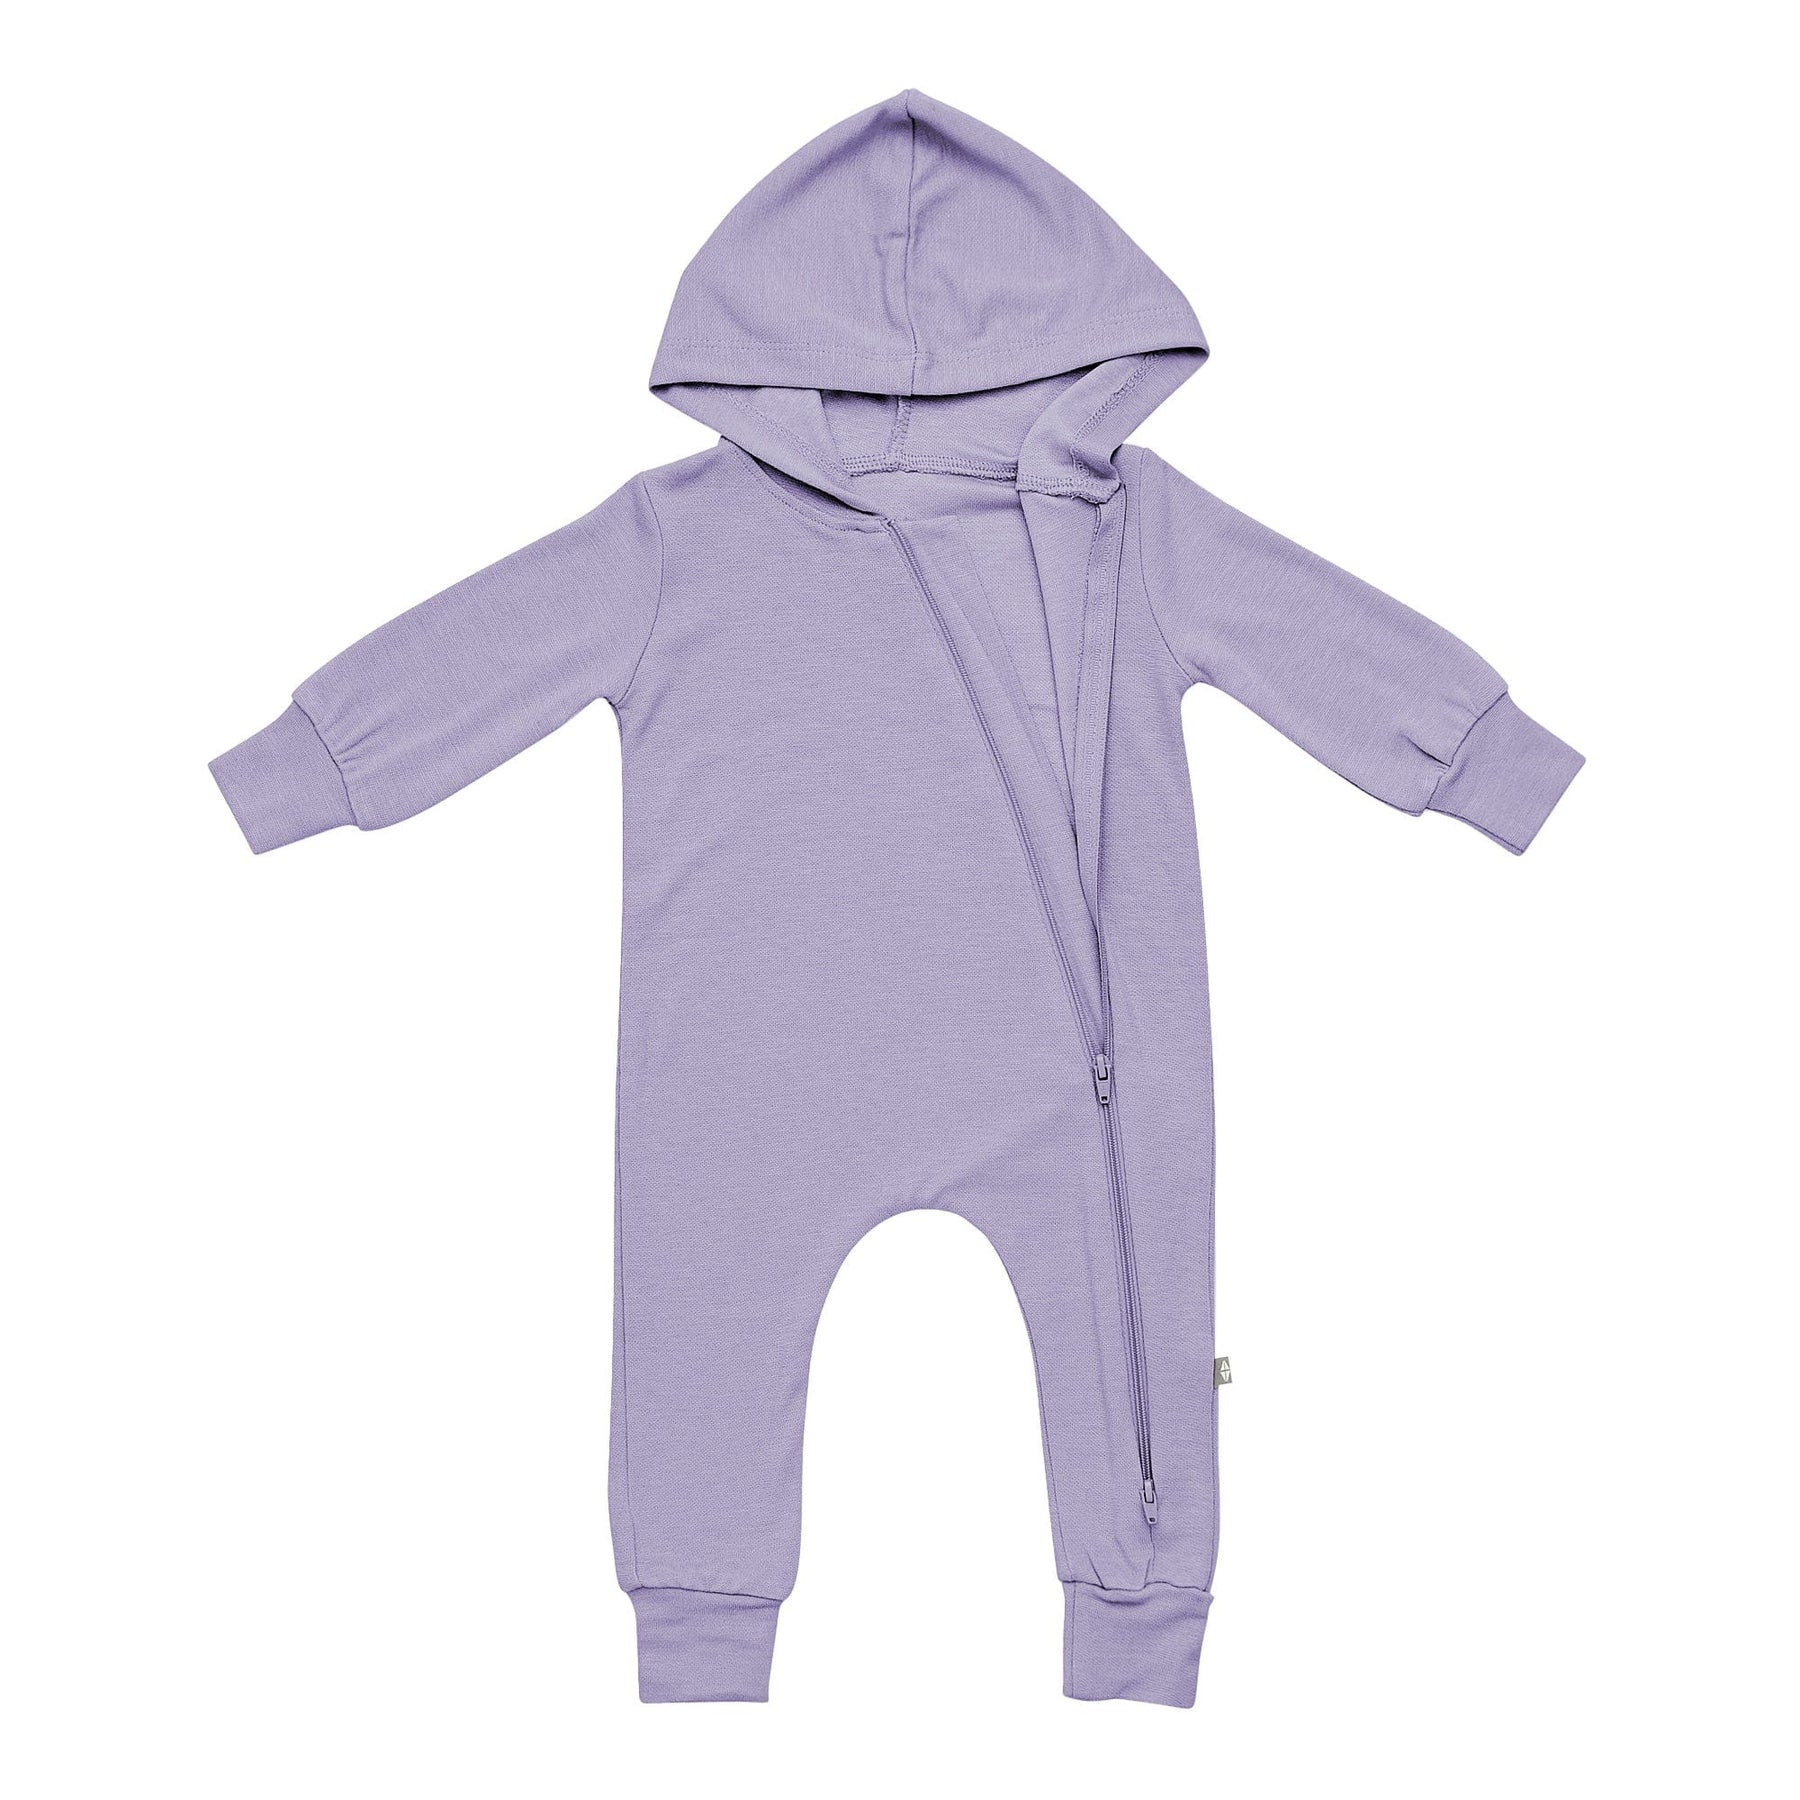 Kyte BABY Hooded Zippered Romper Bamboo Jersey Hooded Zippered Romper in Taro